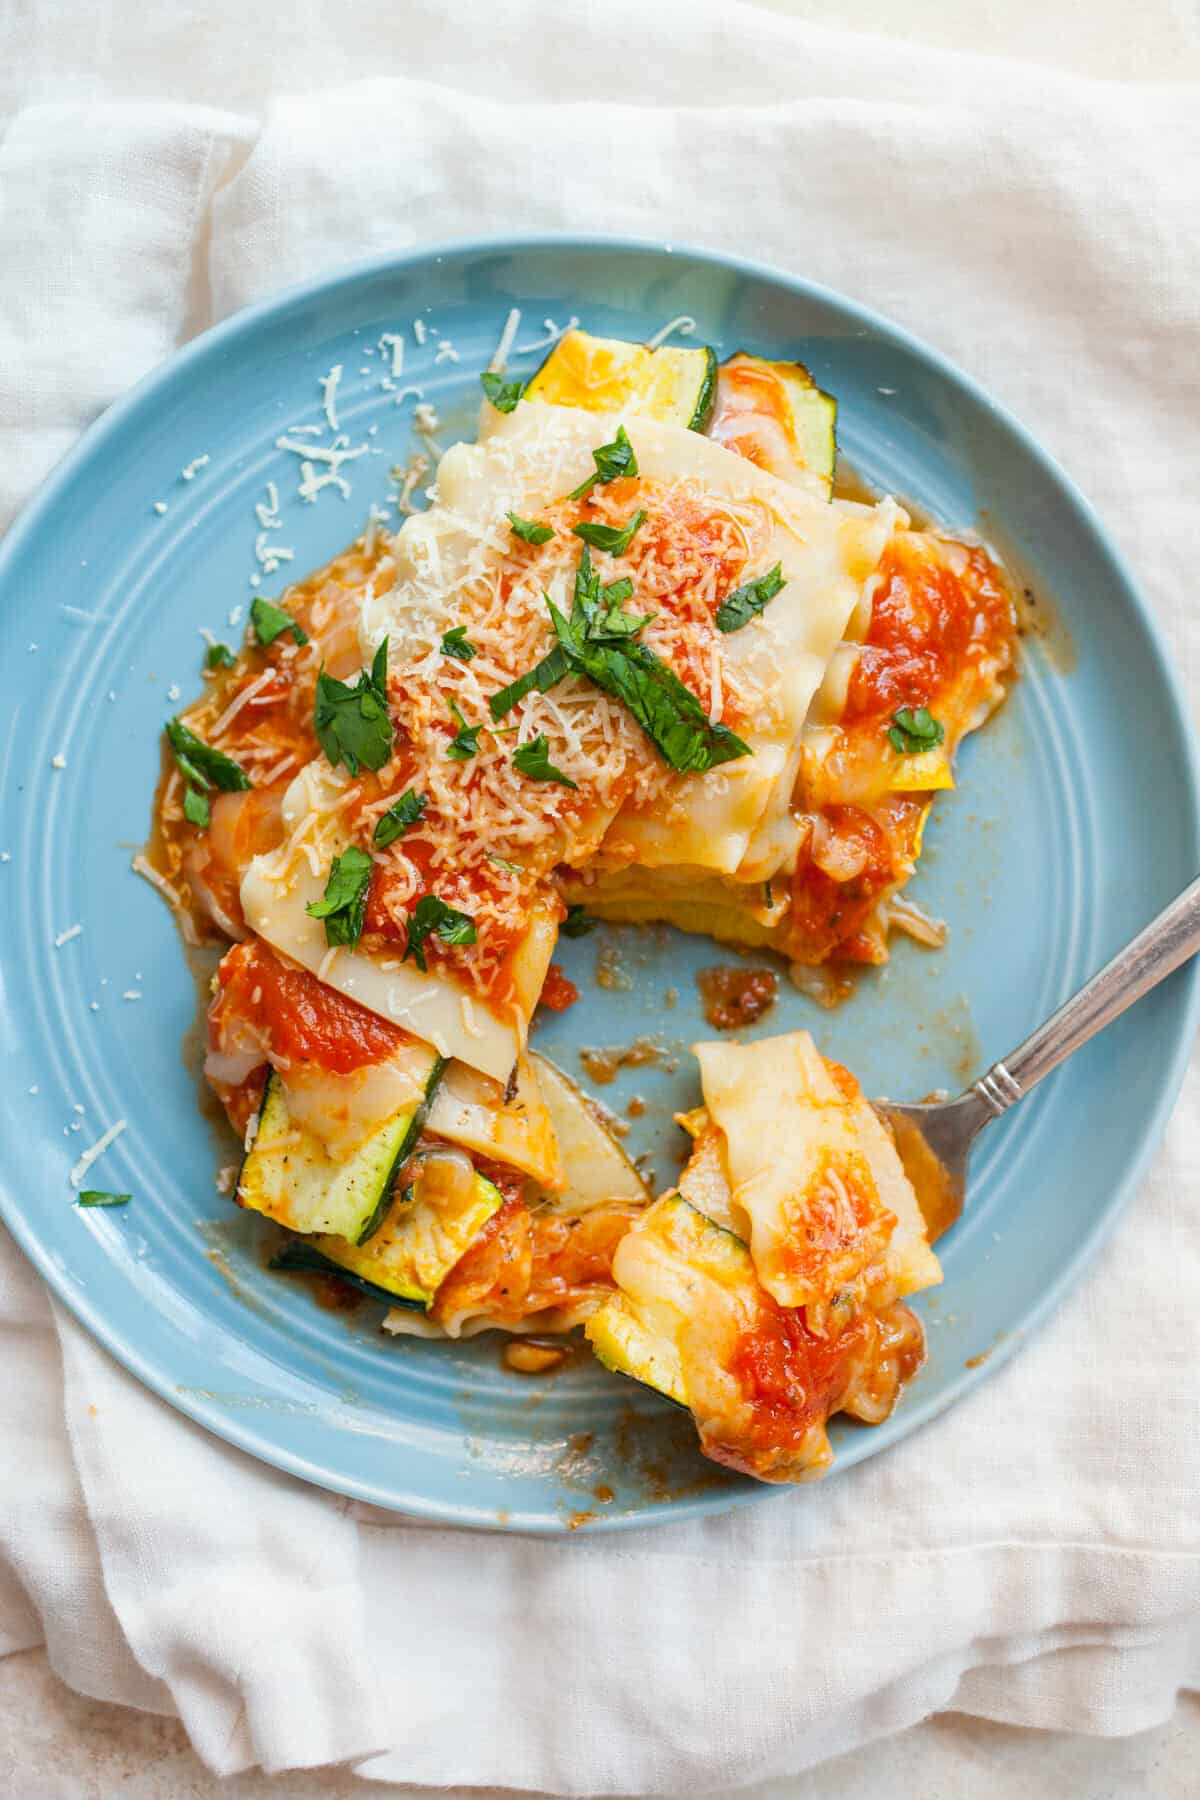 Freeform Veggie Lasagna Stack: If you have a few extra lasagna noodles around, this quick weeknight dinner is the perfect way to use them! | macheesmo.com